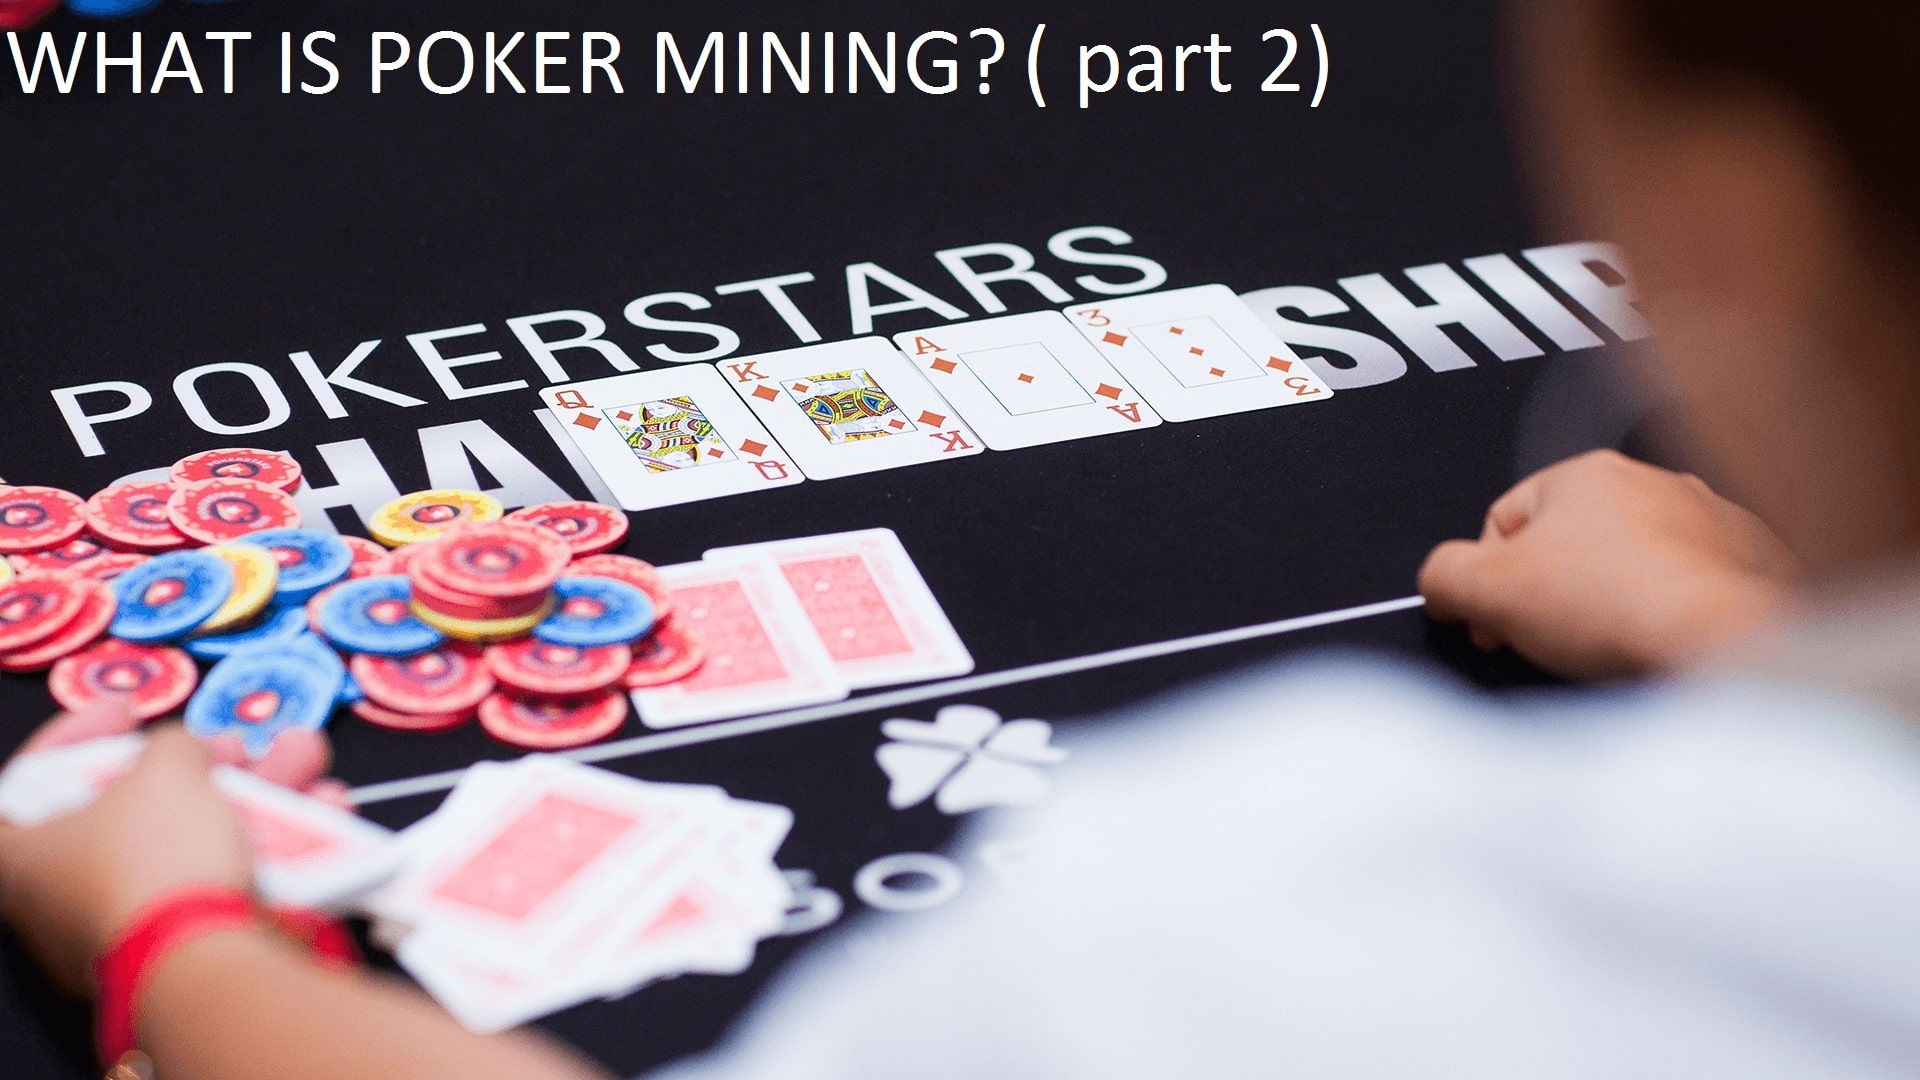 Benefits of poker mining in 2020: how to get an advantage due to it and avoid a ban? (p.2)